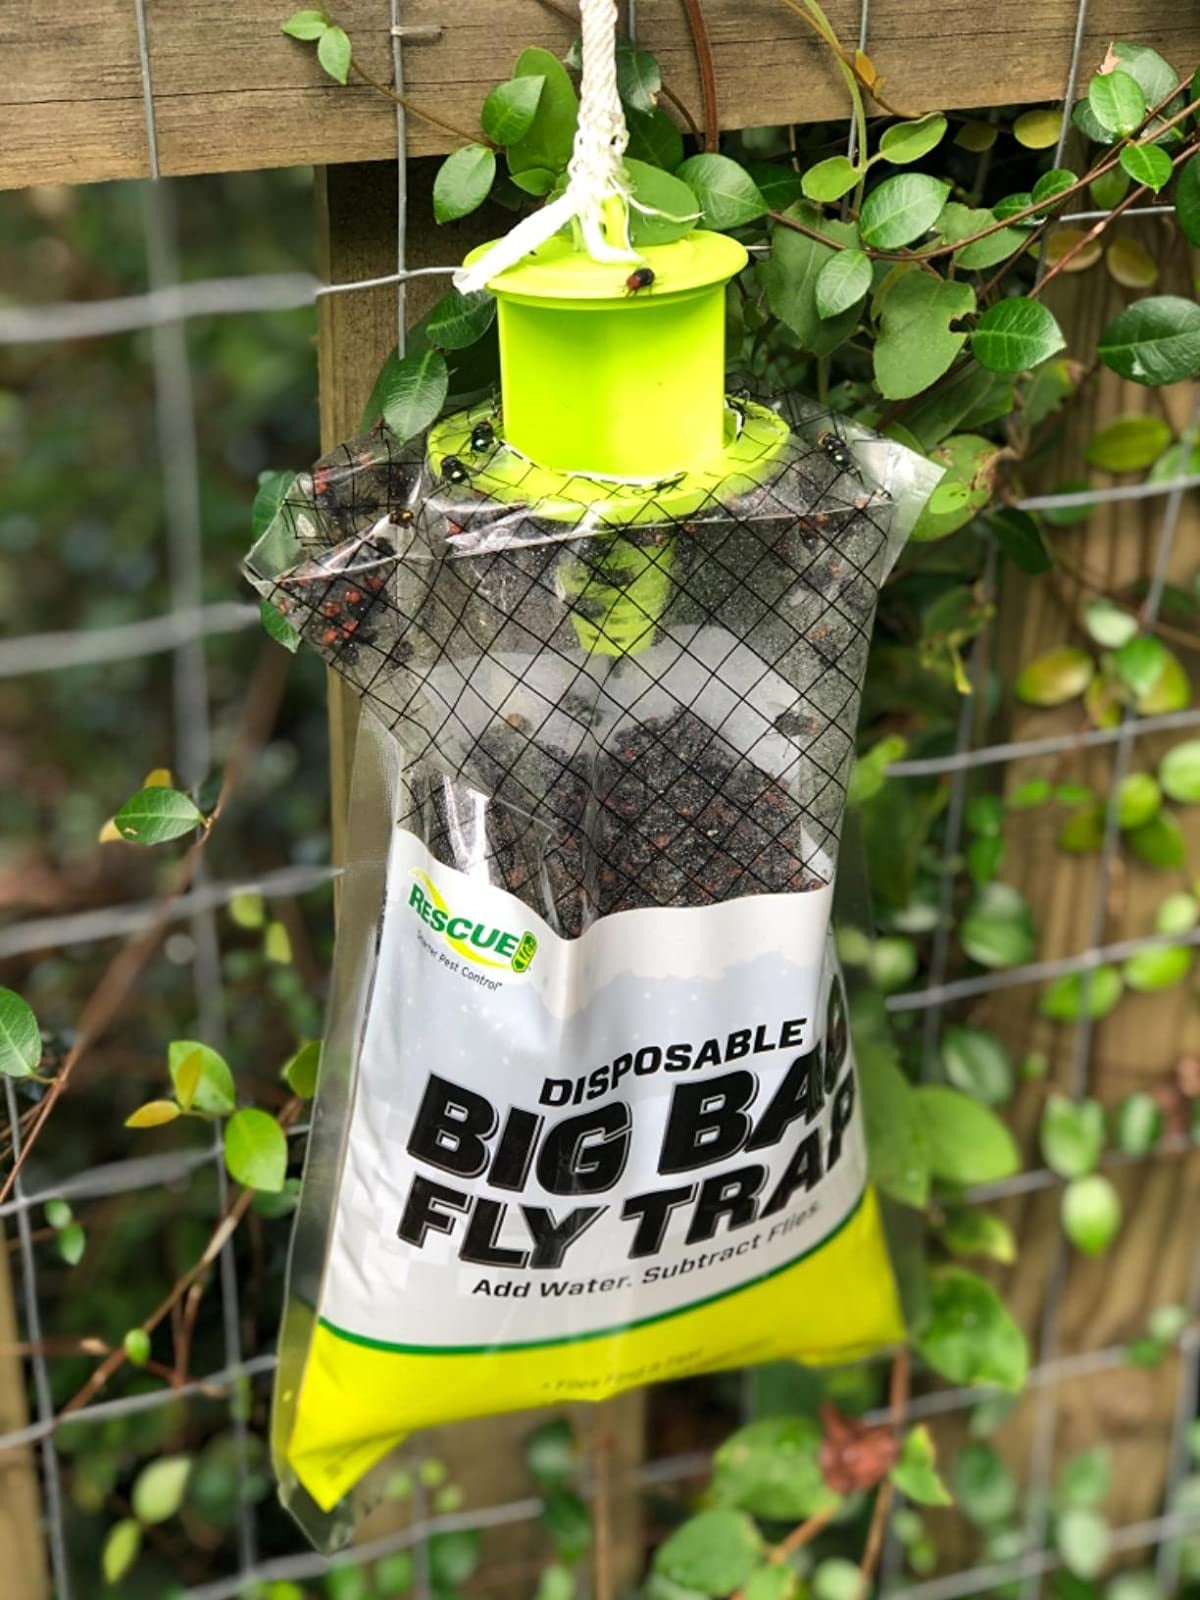 the disposable fly trap bag hanging from a fence